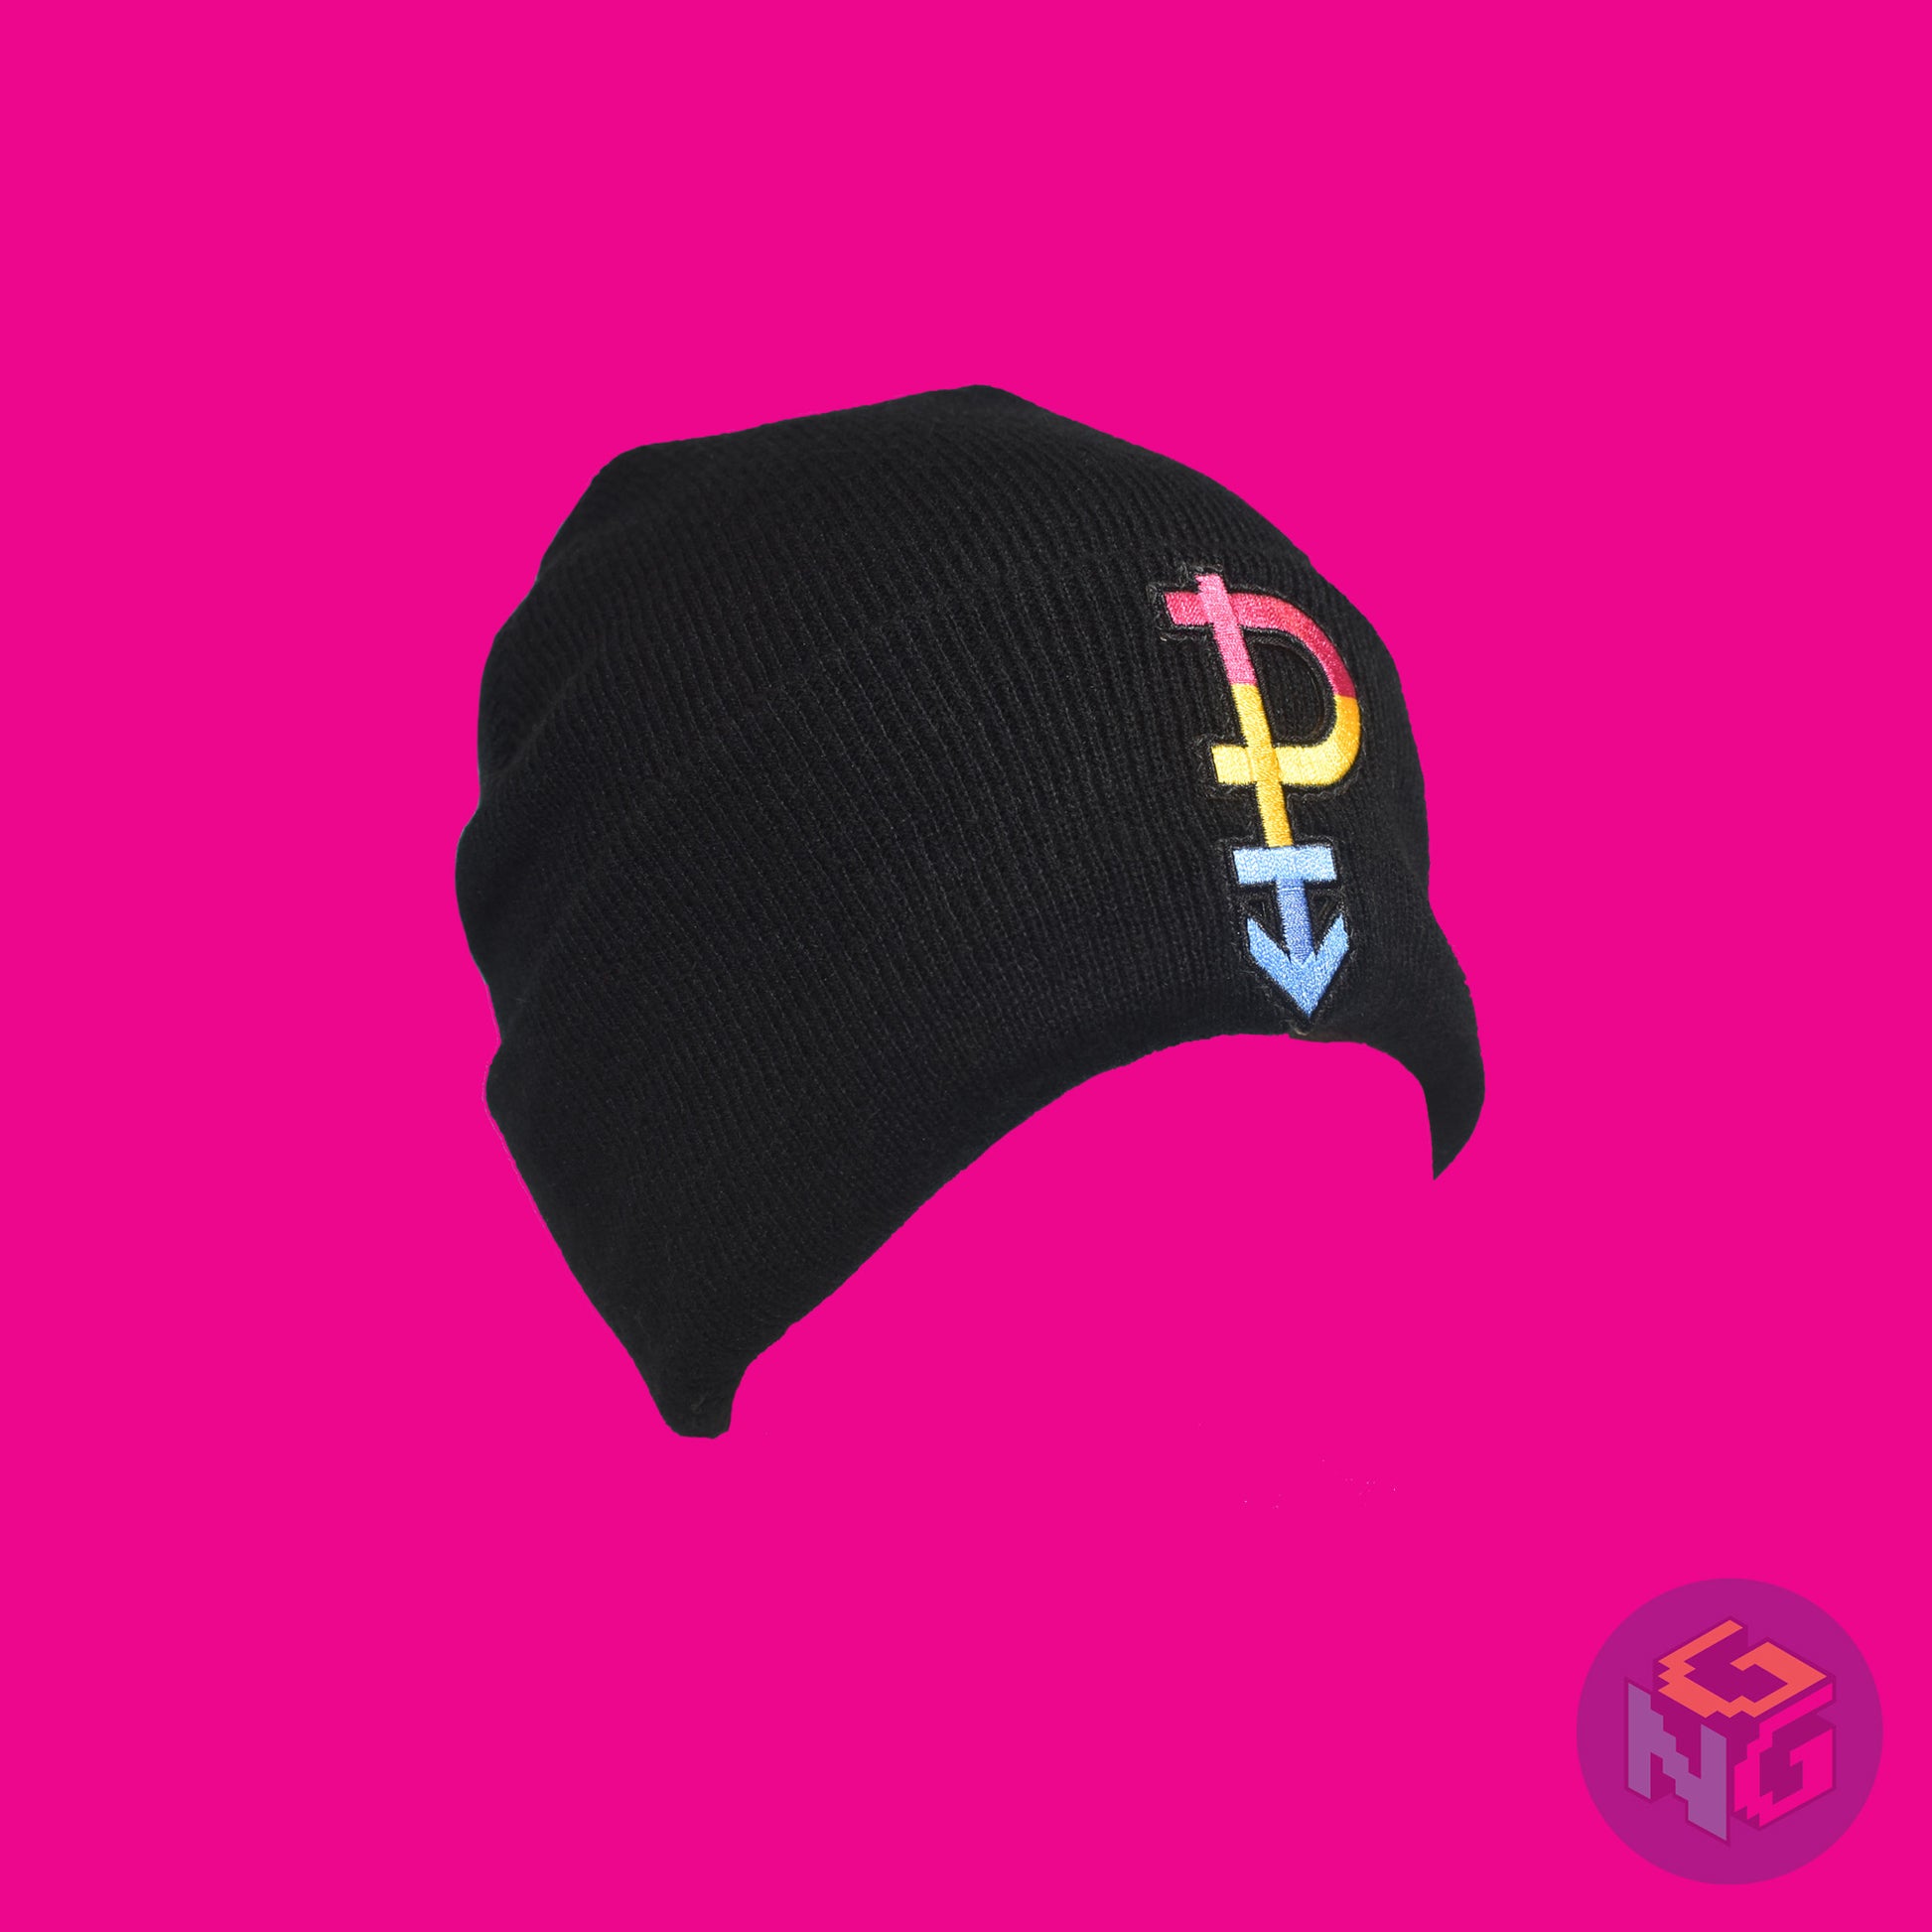 Black knit fabric beanie with the pansexual symbol in pink, yellow, and blue on the front. It is stretched and in 3/4 view on a pink background